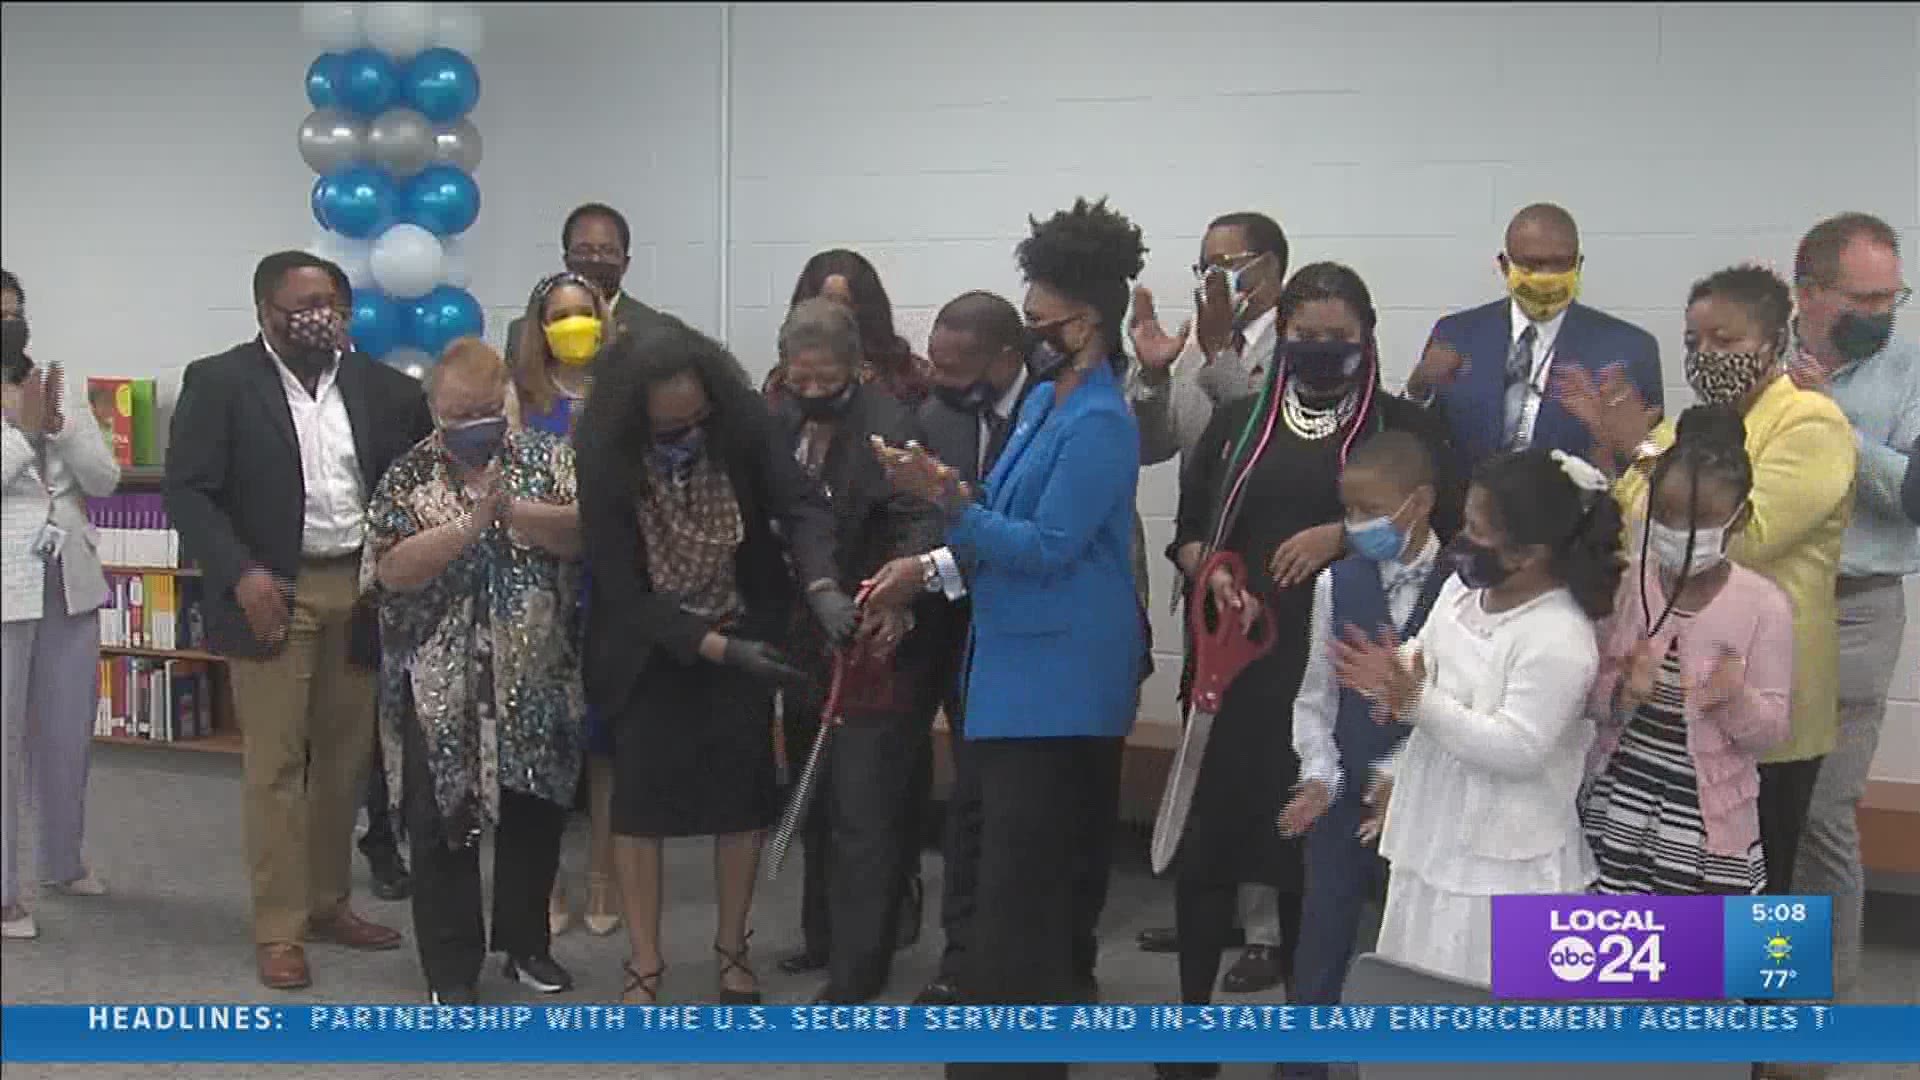 The new building merges students from three schools in an under-served area of south Memphis.